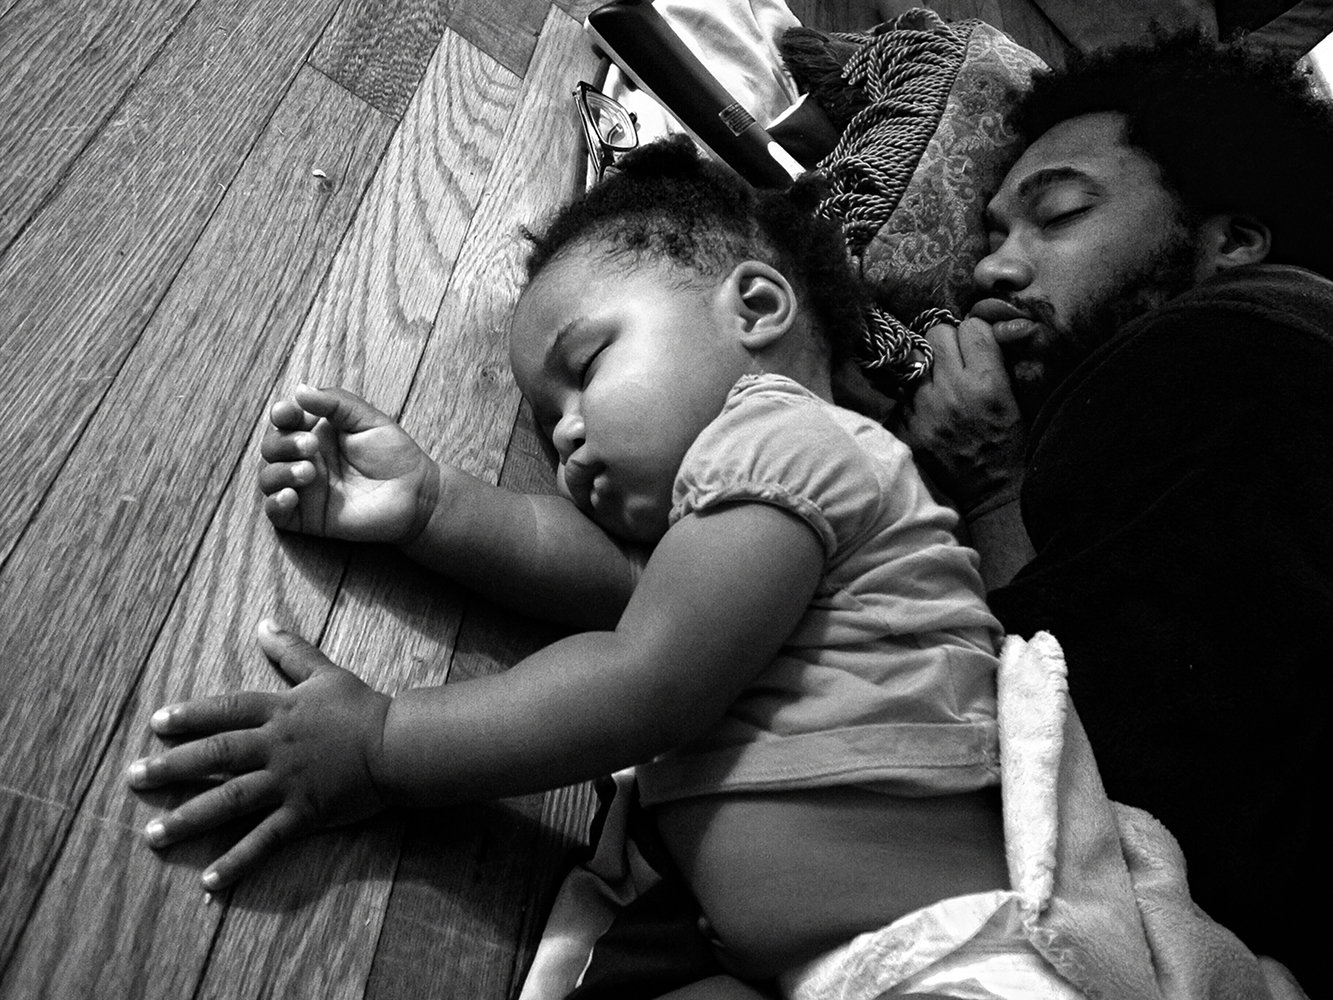  Zun Lee,  Anthony Francis falls asleep with daughter Tena in front of his TV , Camp Lejeune, NC, 2012 